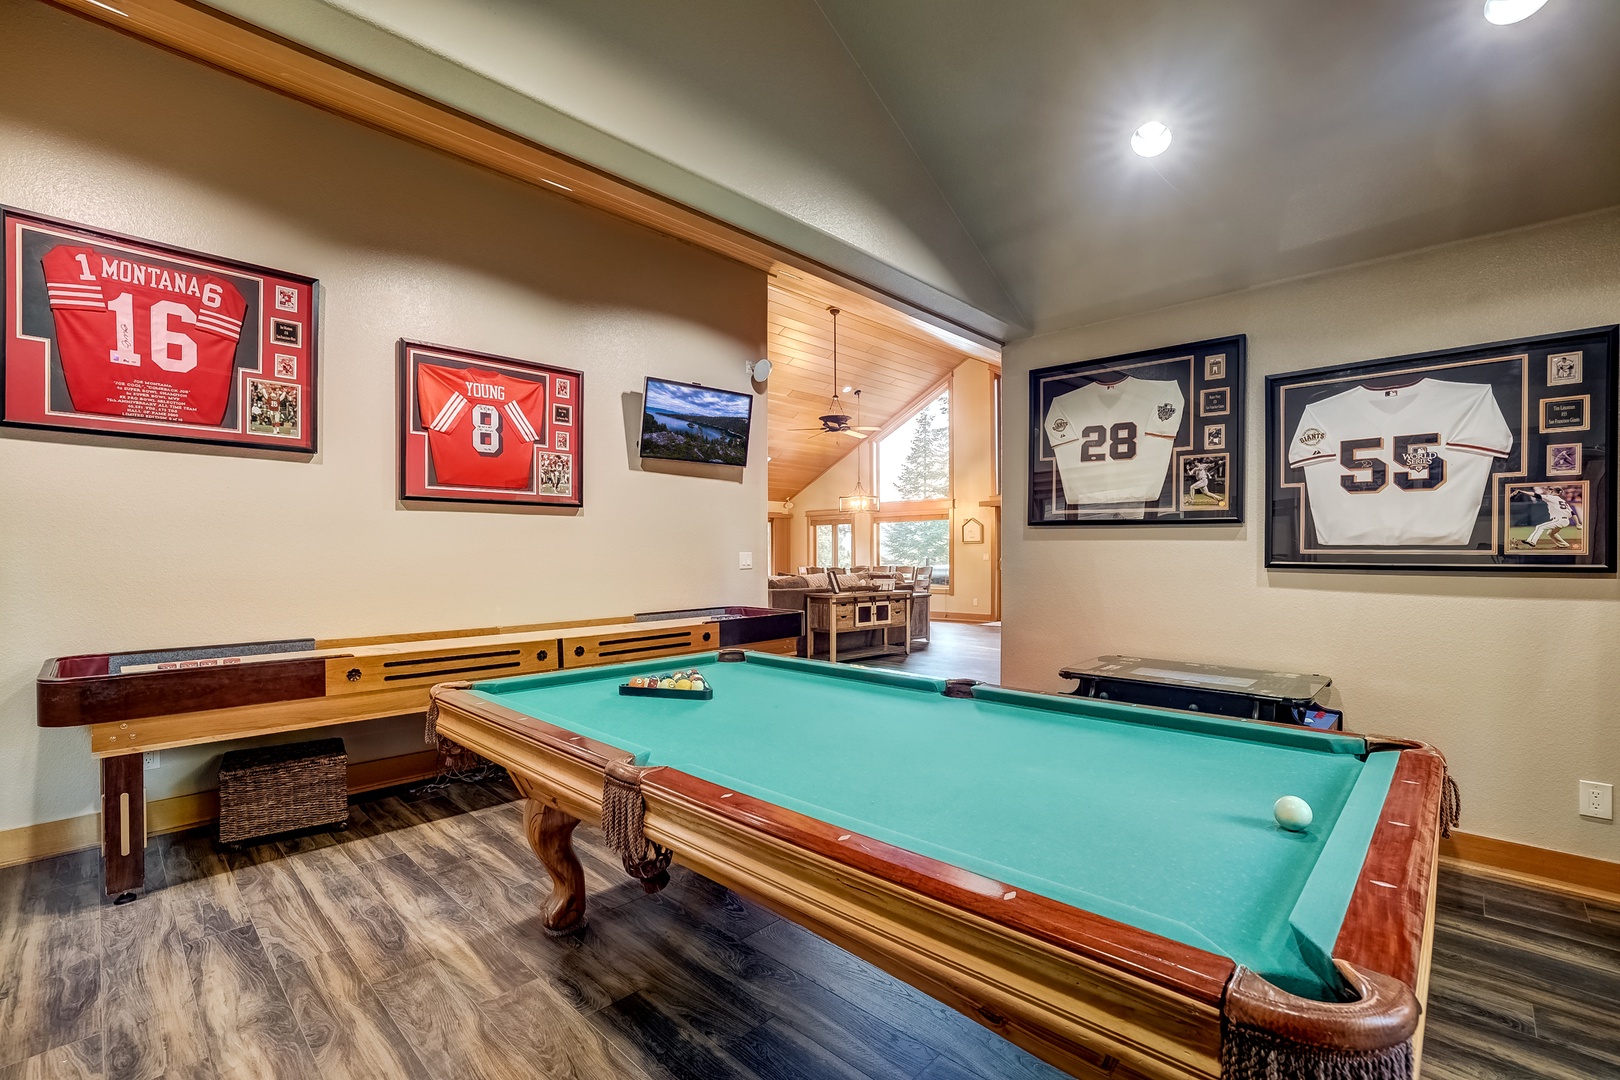 Game room with pool table & PacMan table